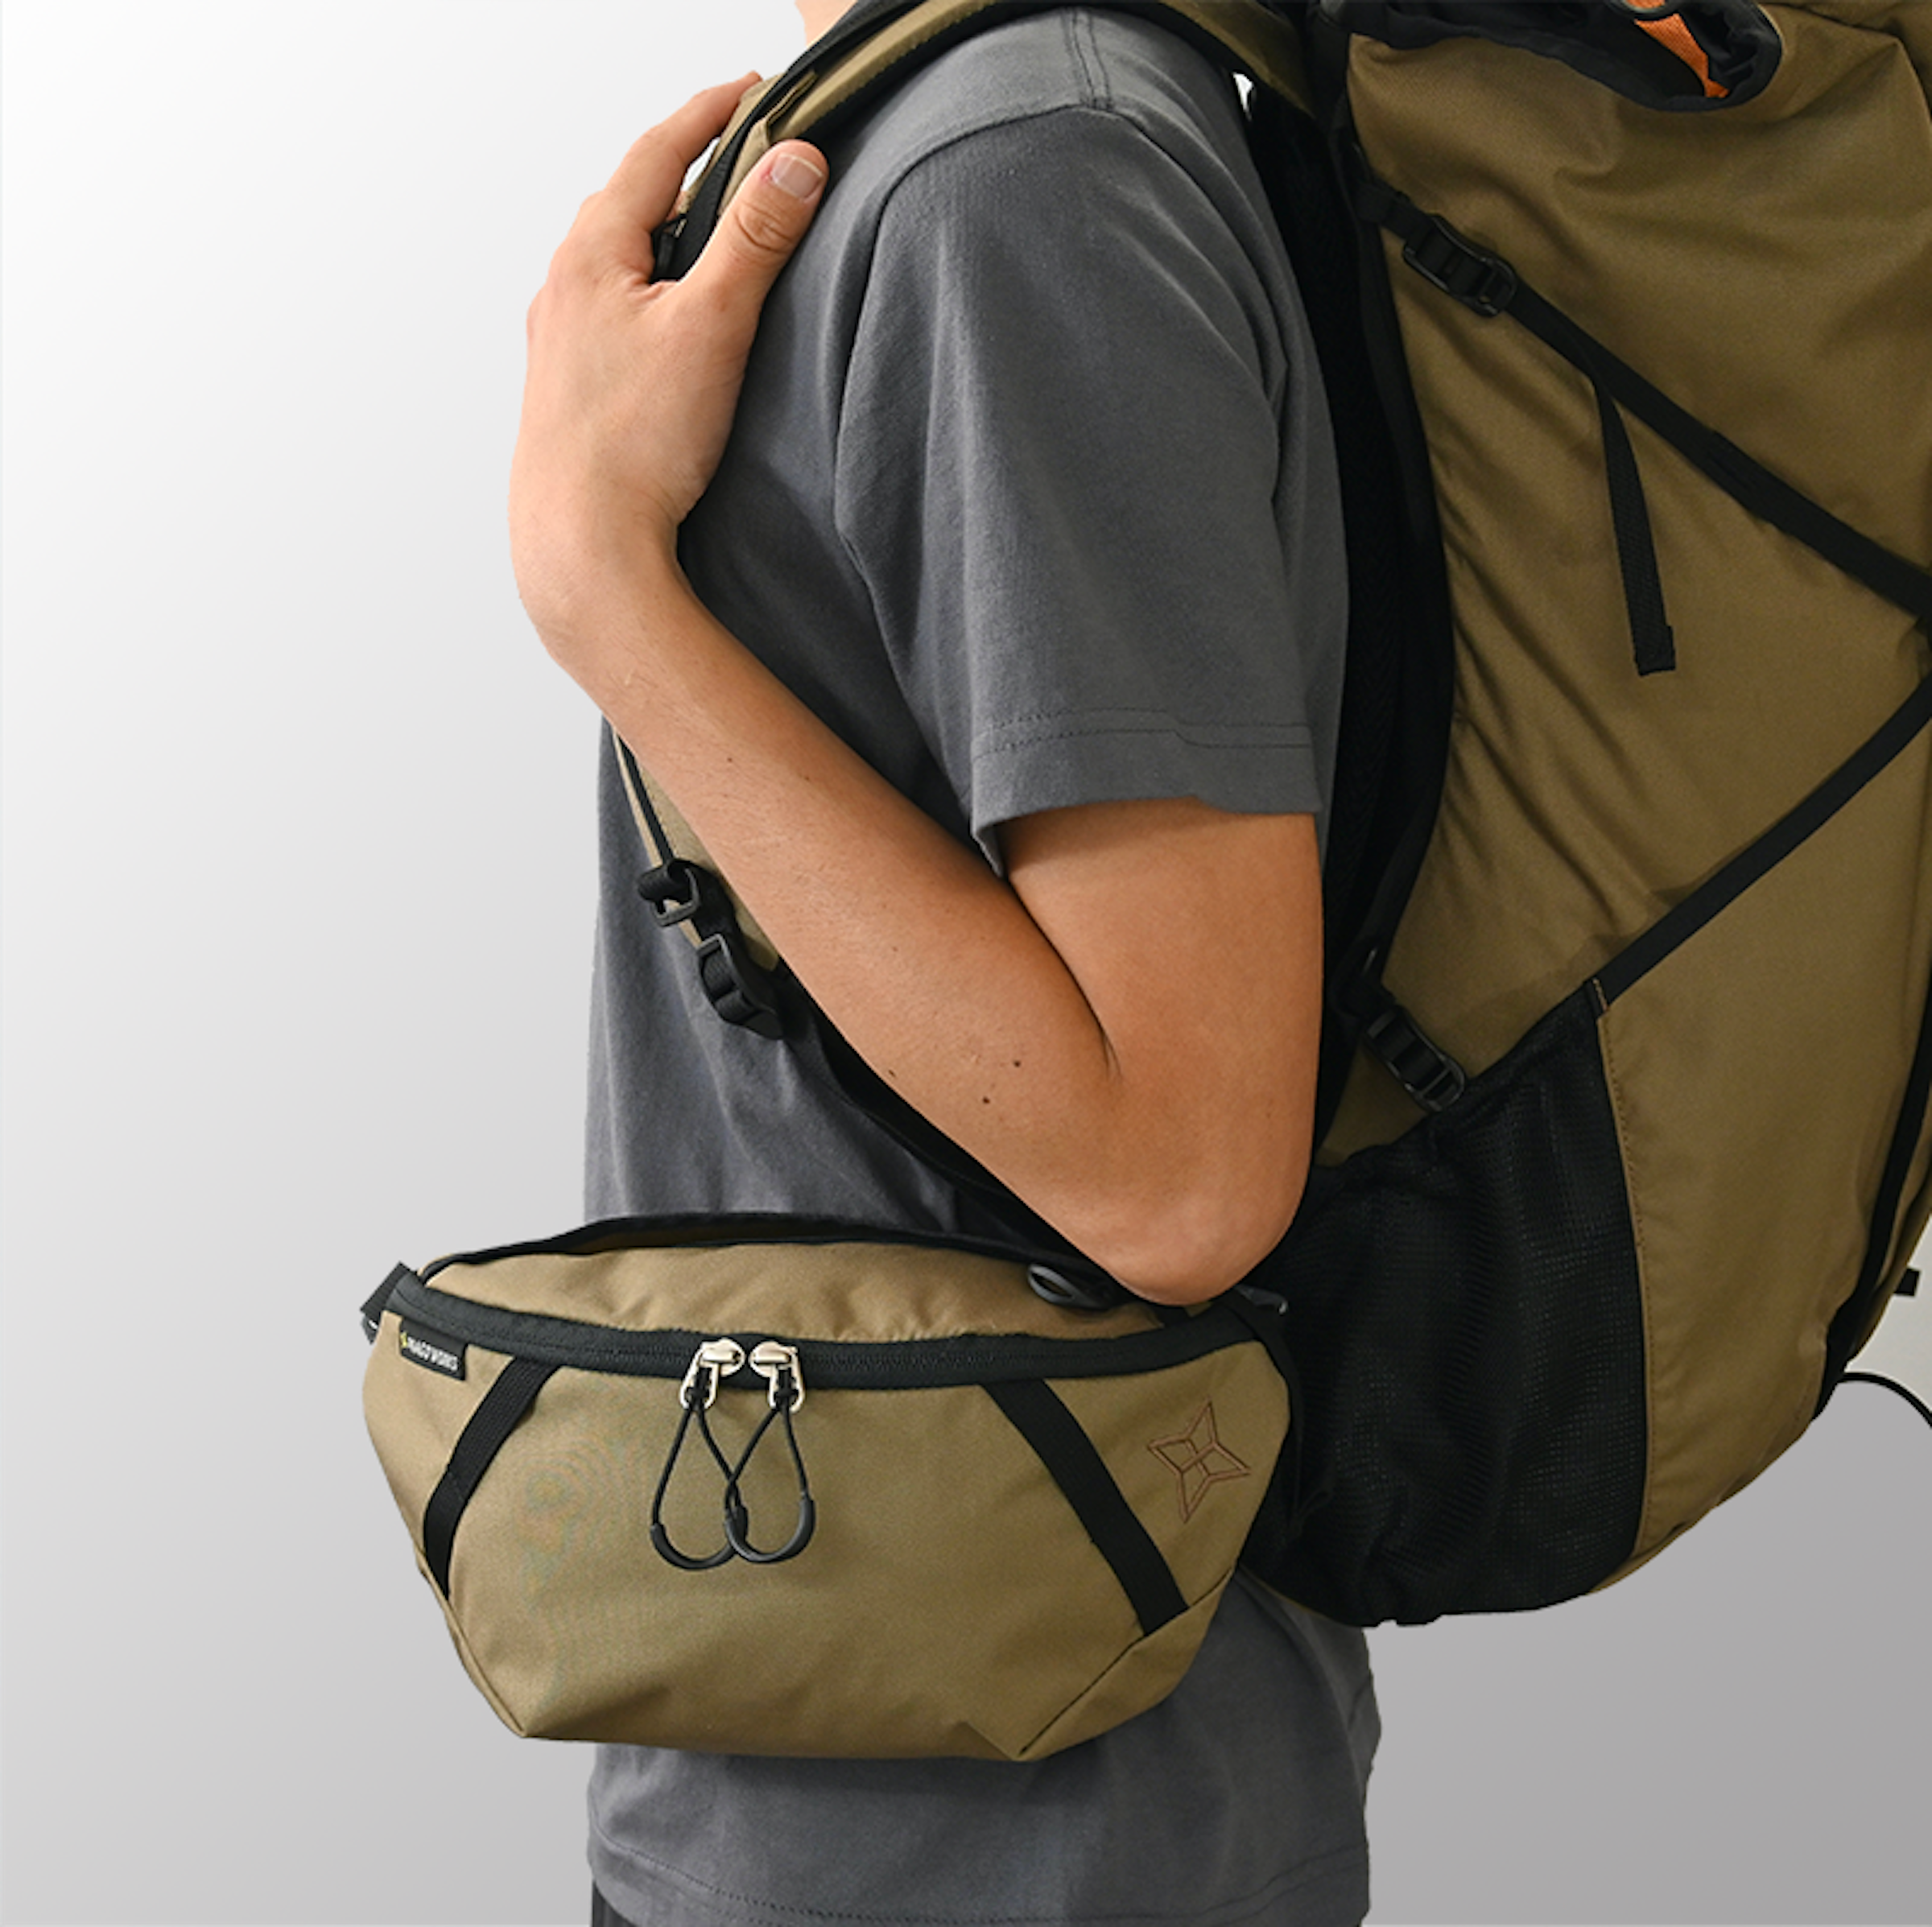 If you thread the backpack's waist belt through the loop on the back of the 'Switch', it can also be used as a sidebag